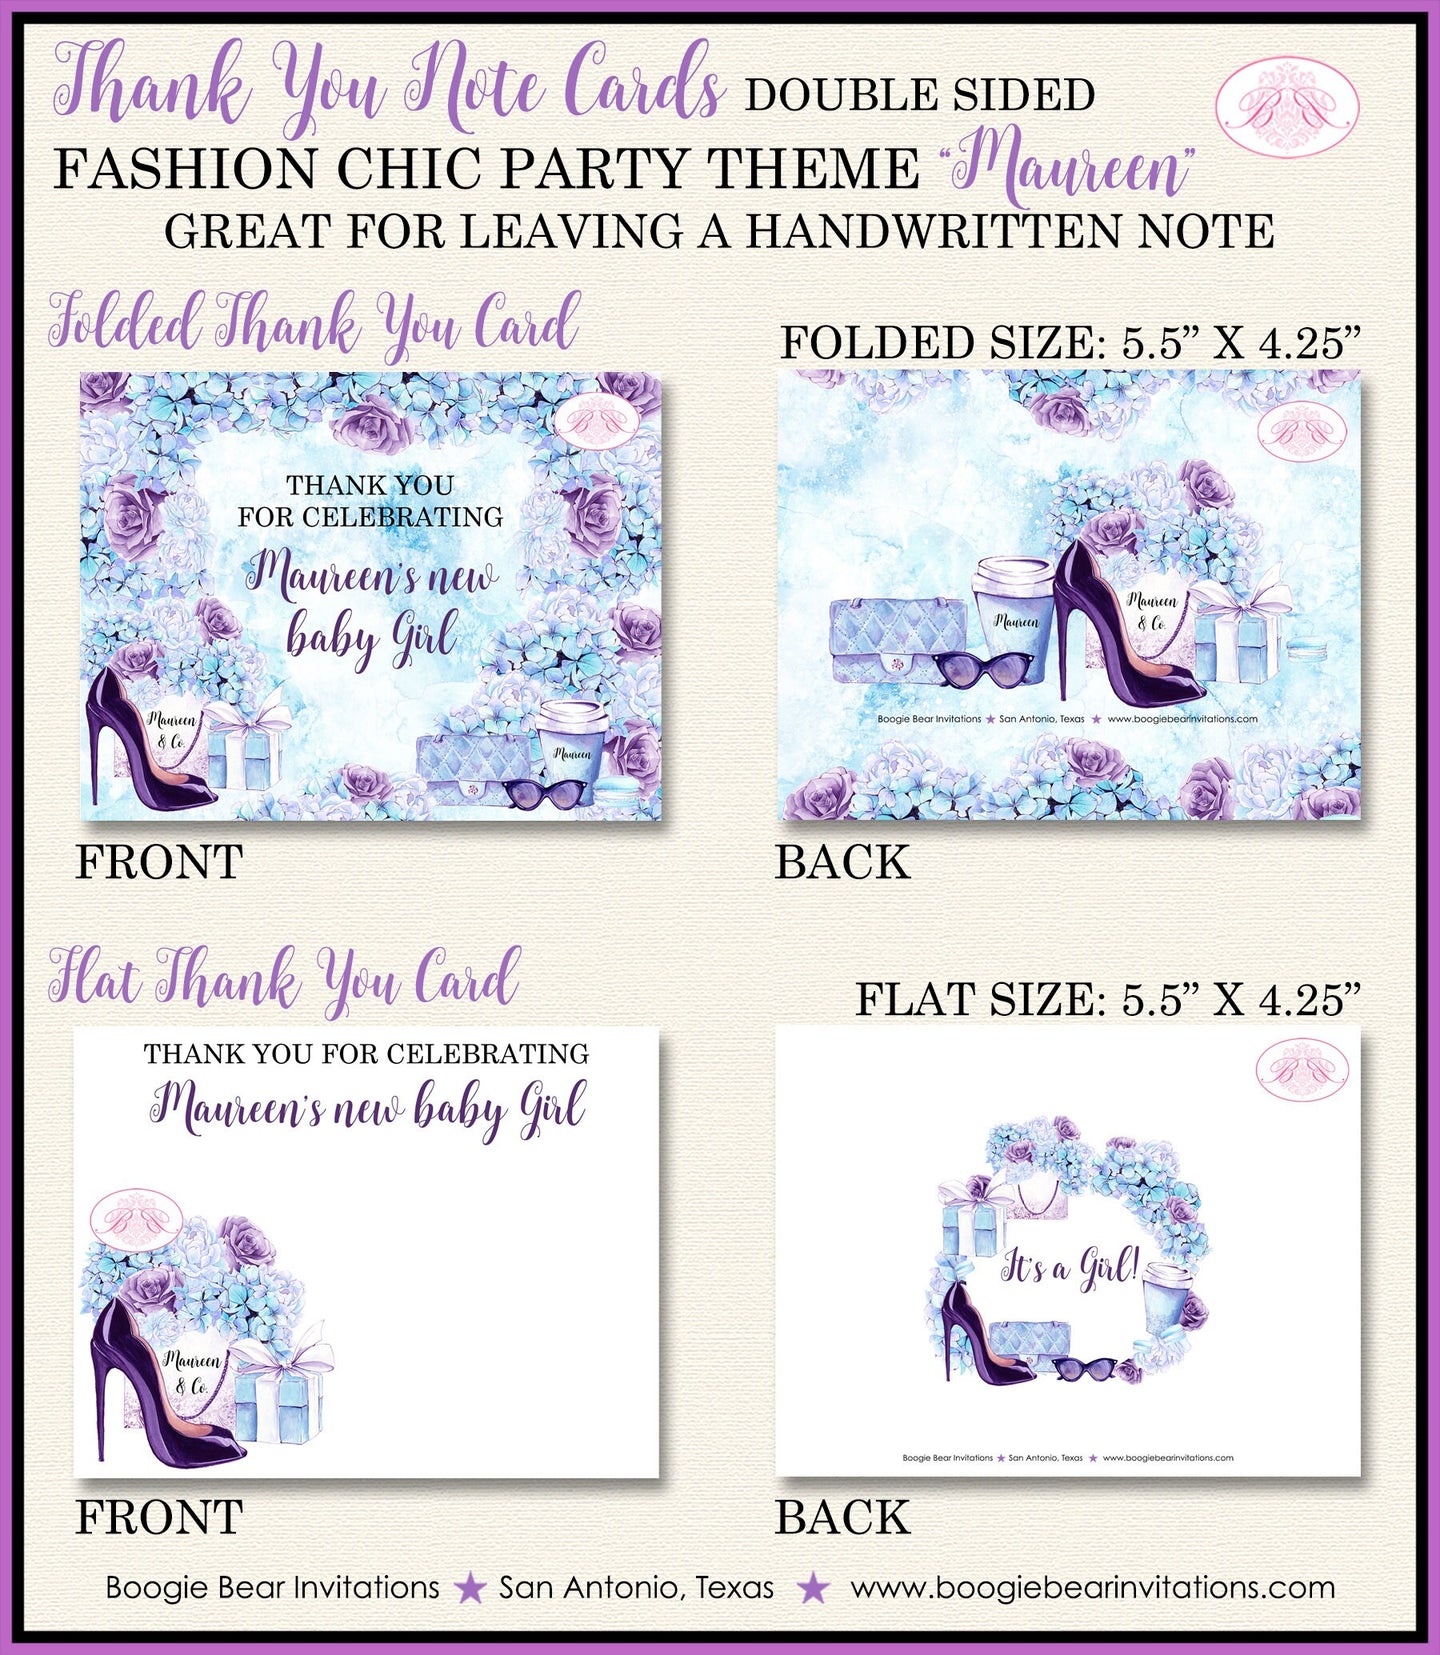 Fashion Chic Party Thank You Cards Baby Shower Note Birthday Party Lavender Purple Shopping Co Boogie Bear Invitations Maureen Theme Printed